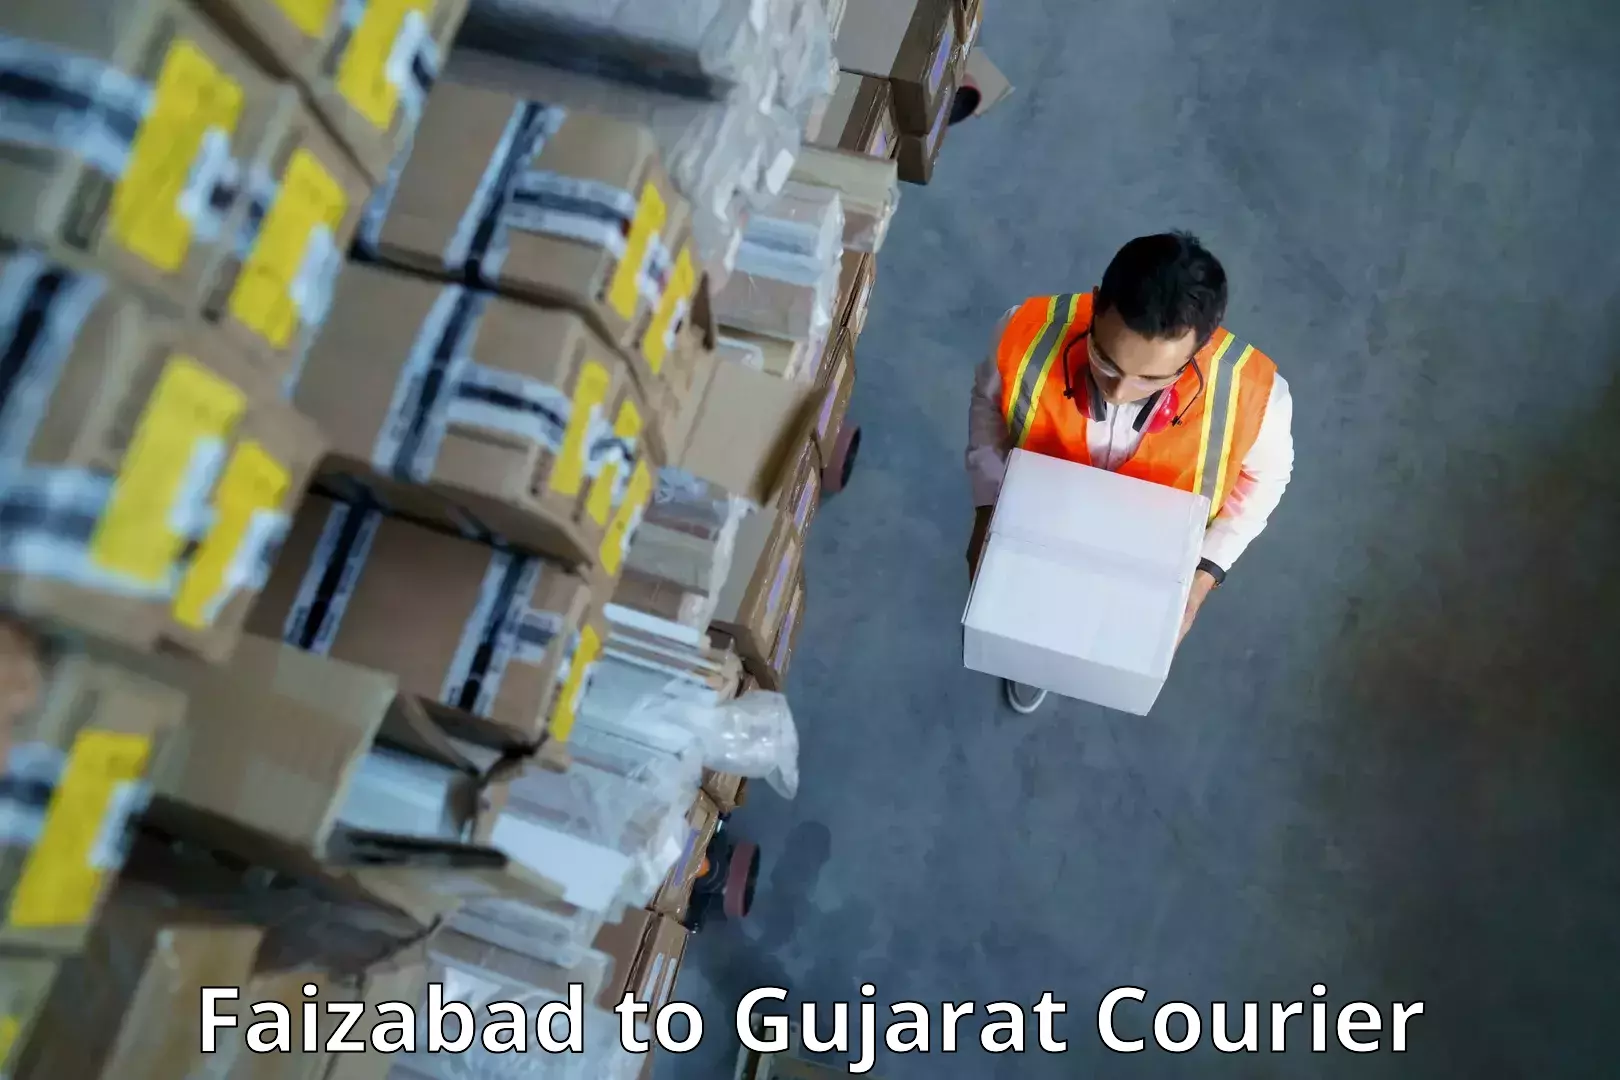 Express delivery network Faizabad to Gujarat